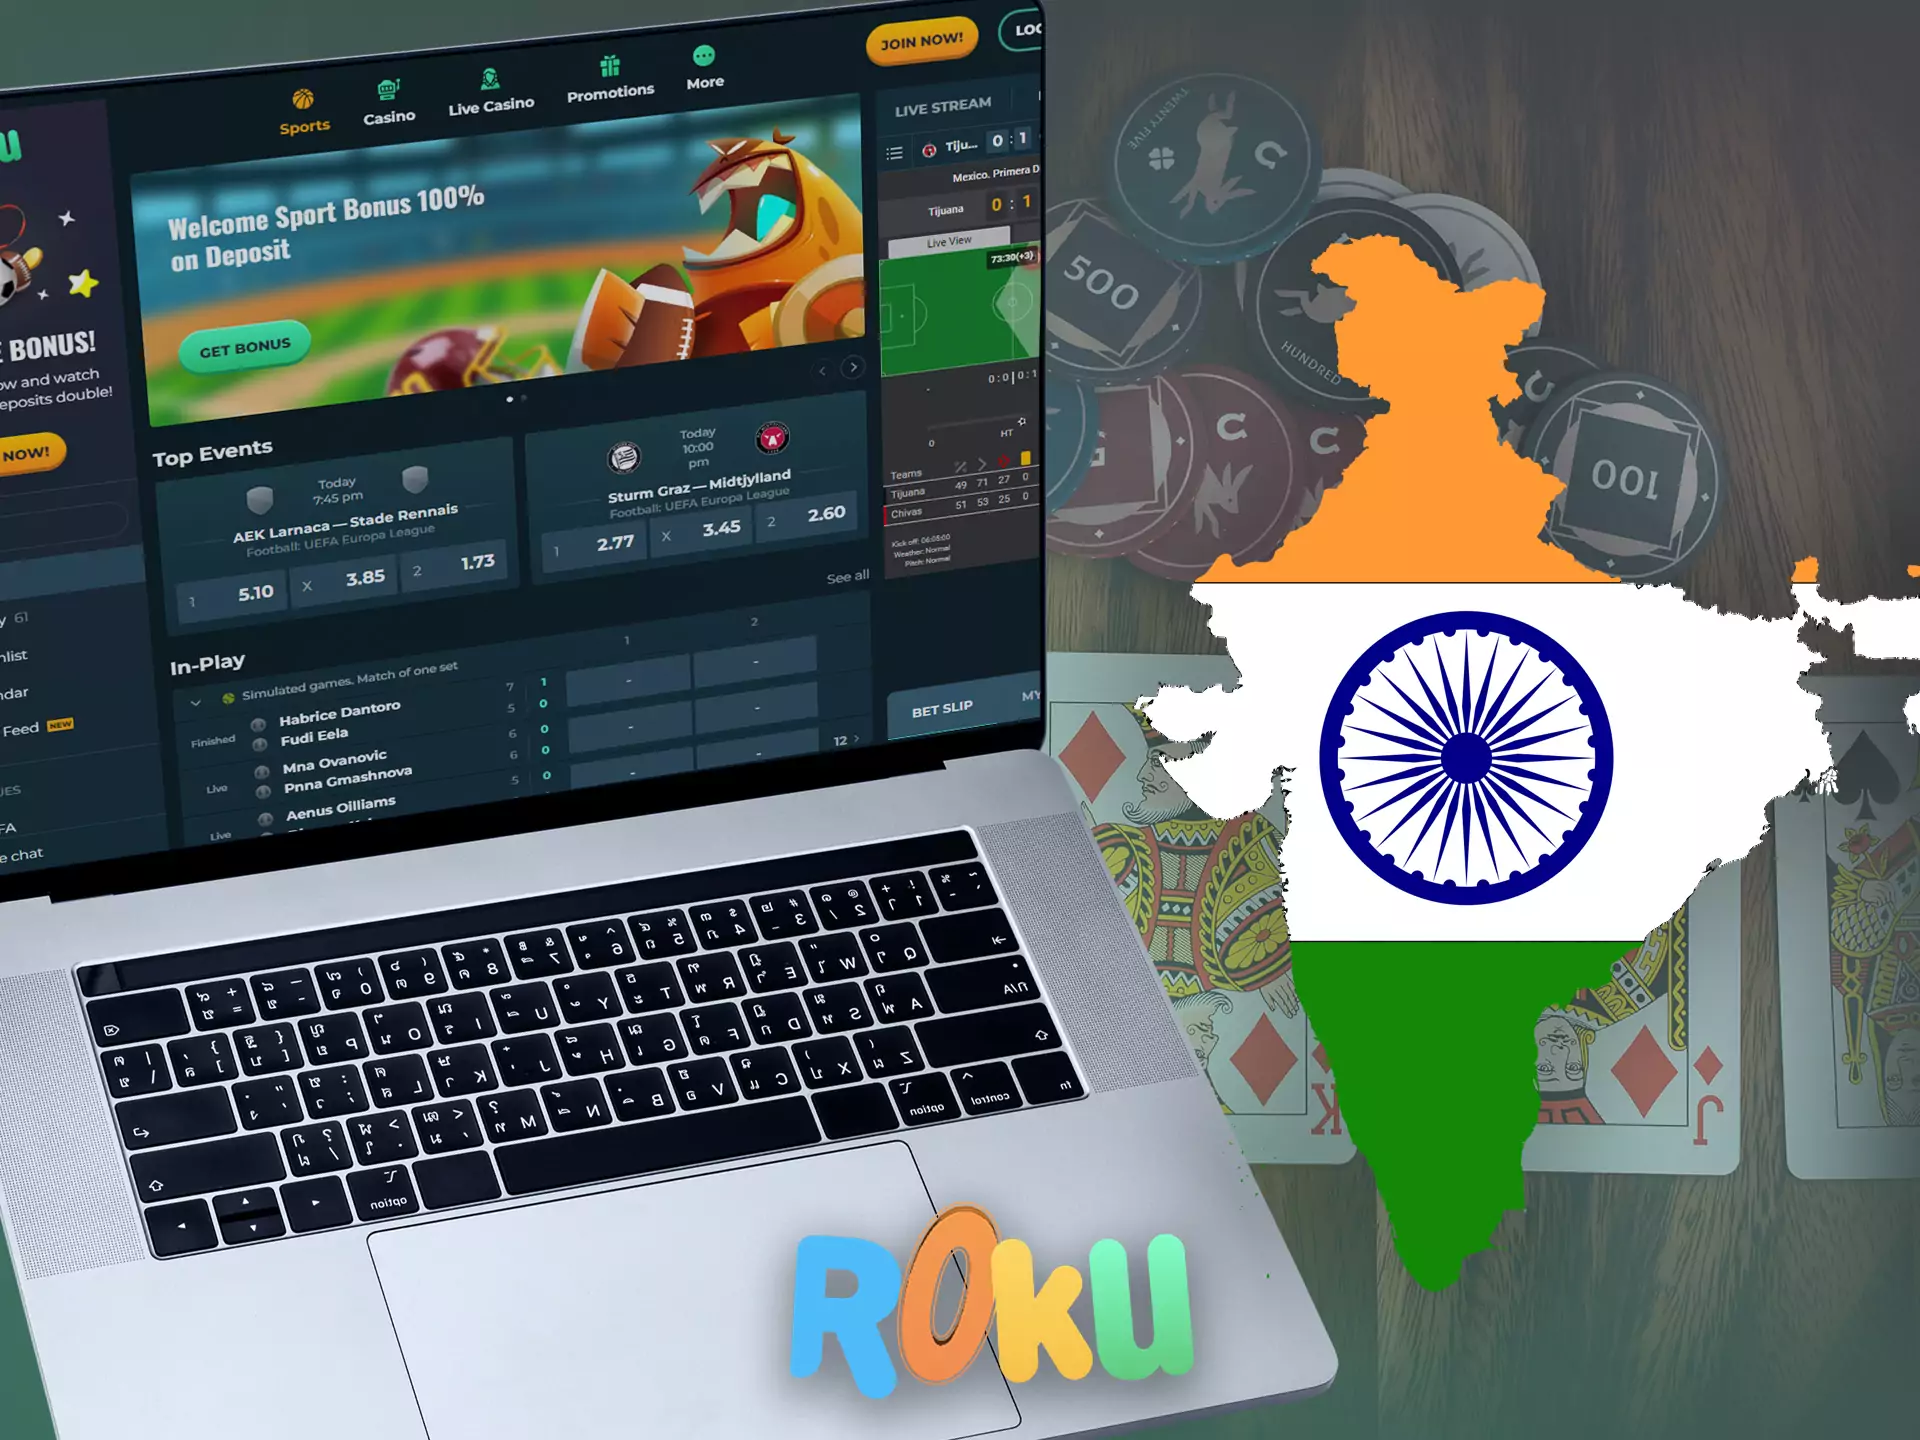 Betting on Rokubet online is legal in India.